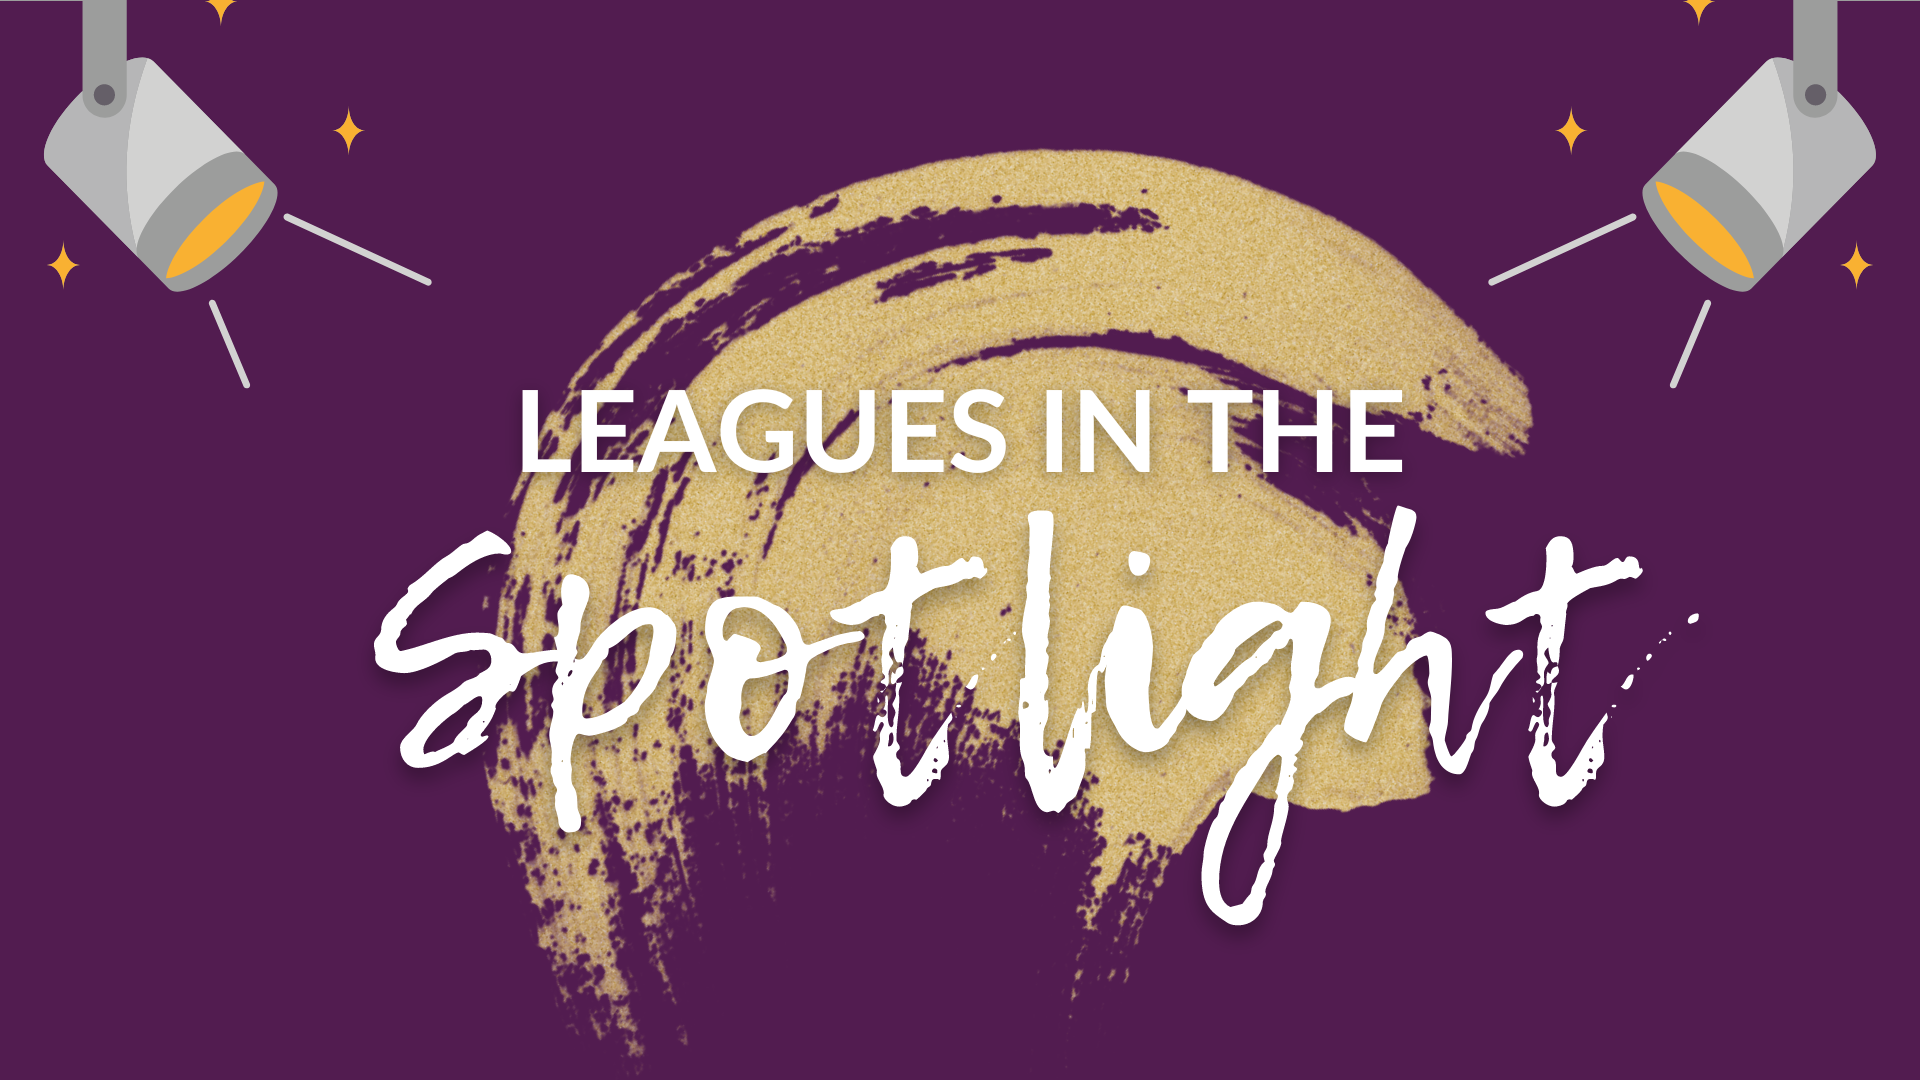 Purple background with white text: League in the Spotlight